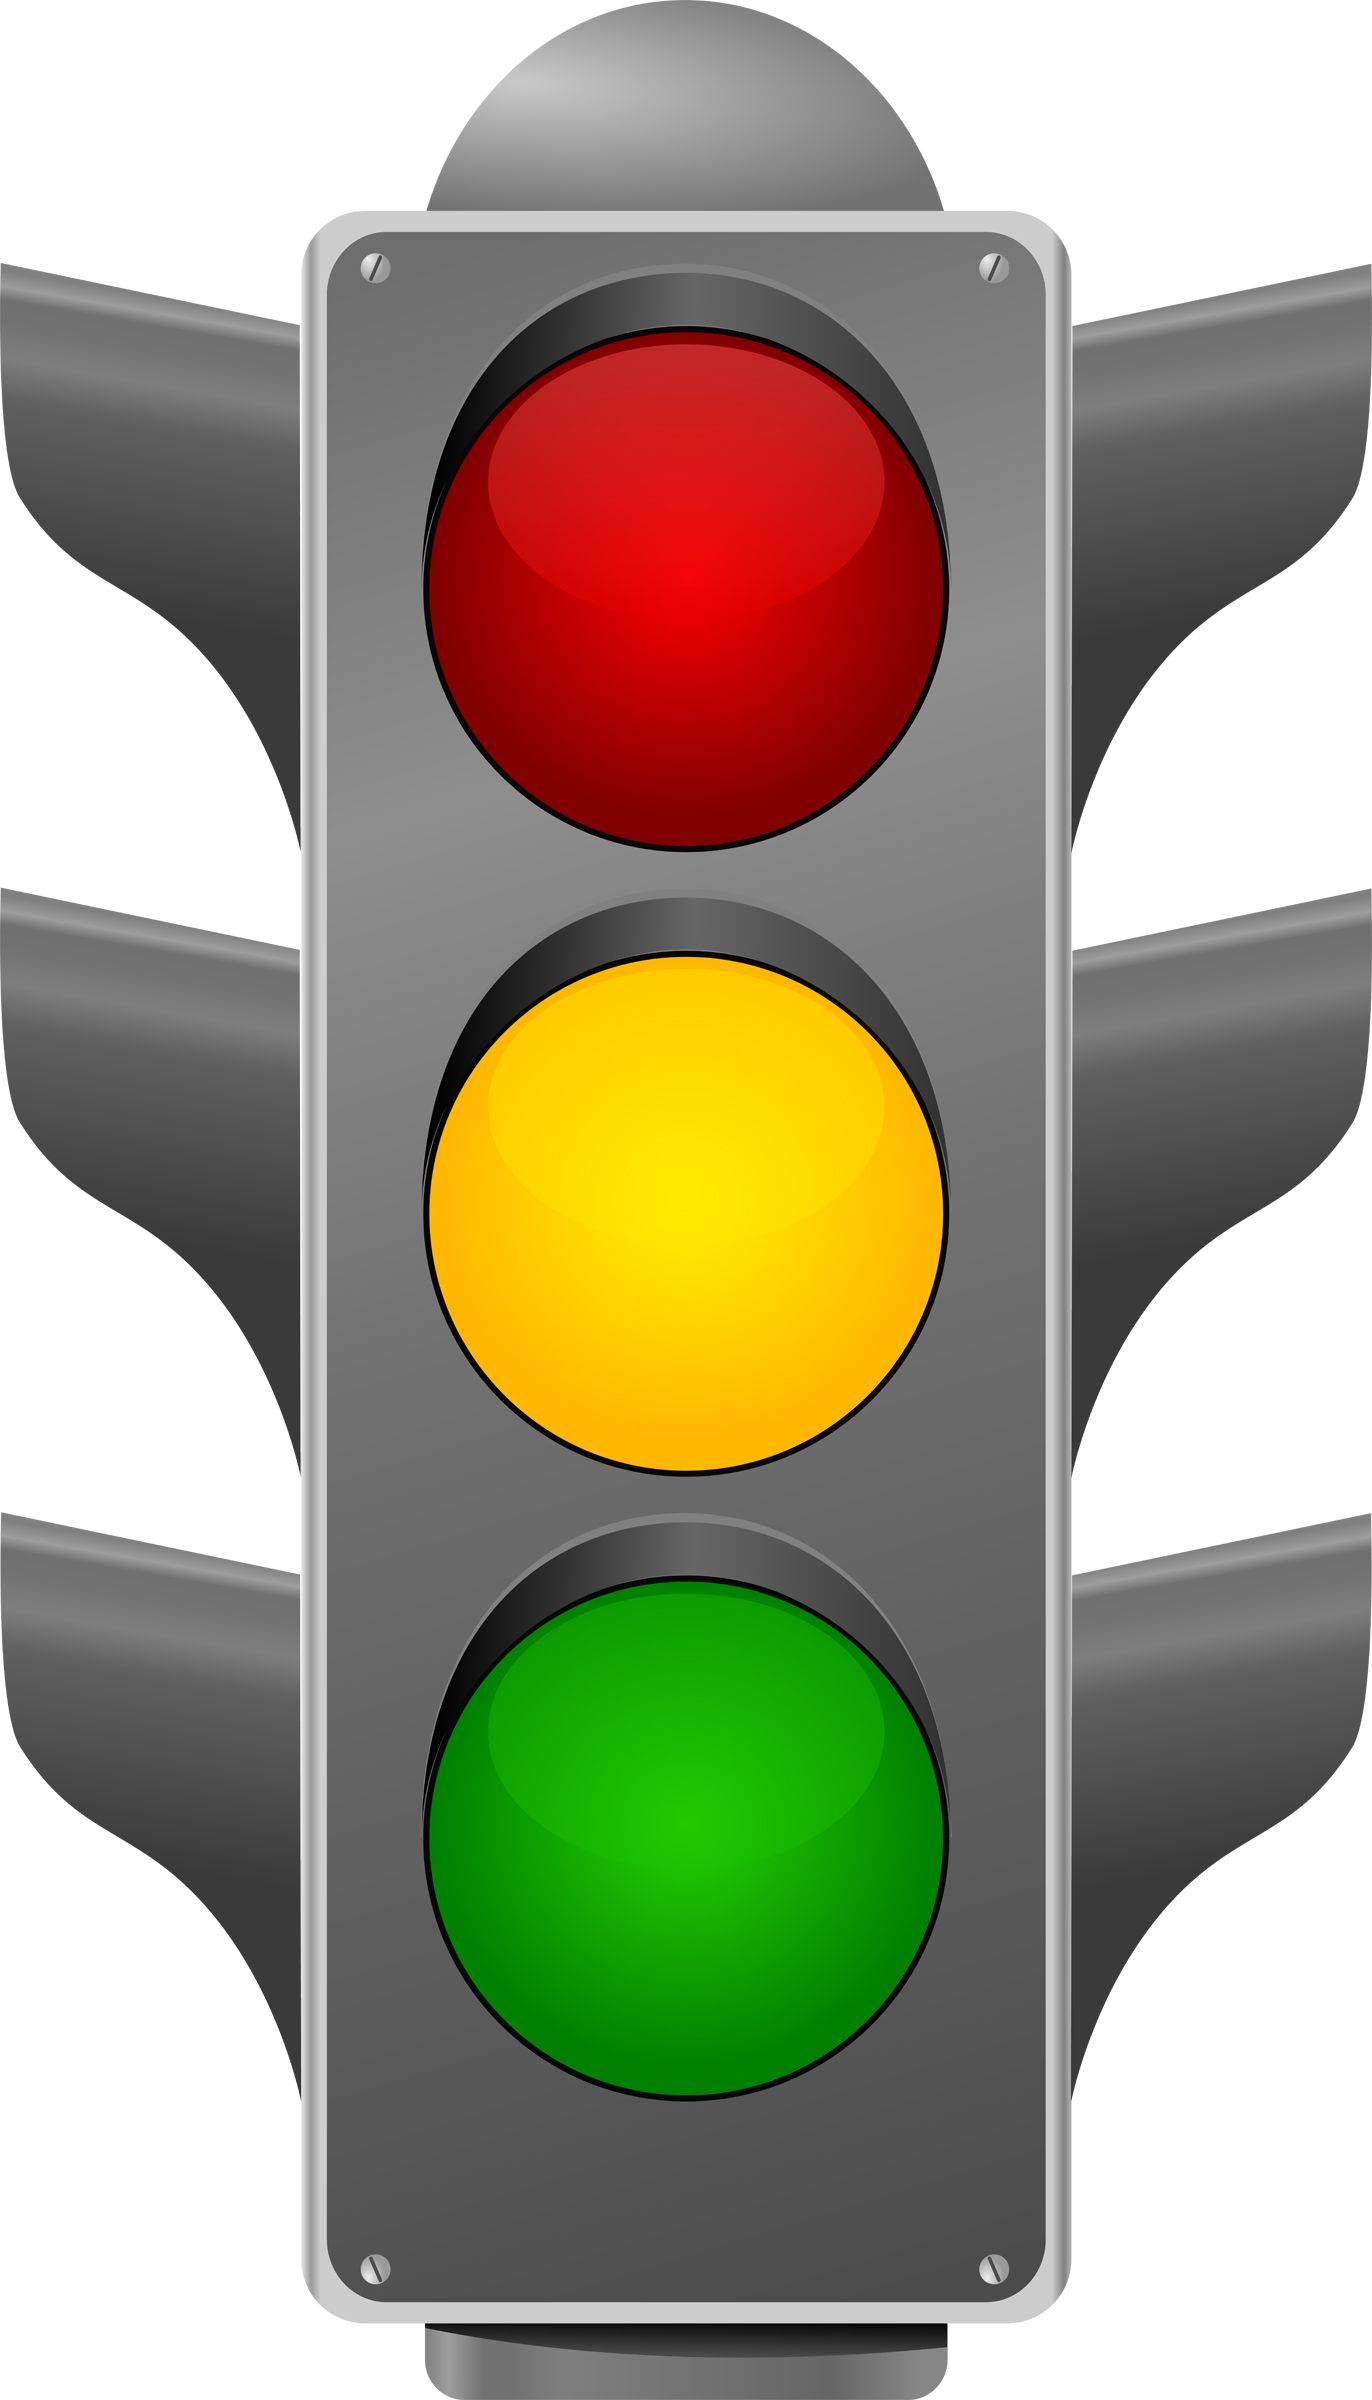 Printable Traffic Light Use These Image For Your Websites